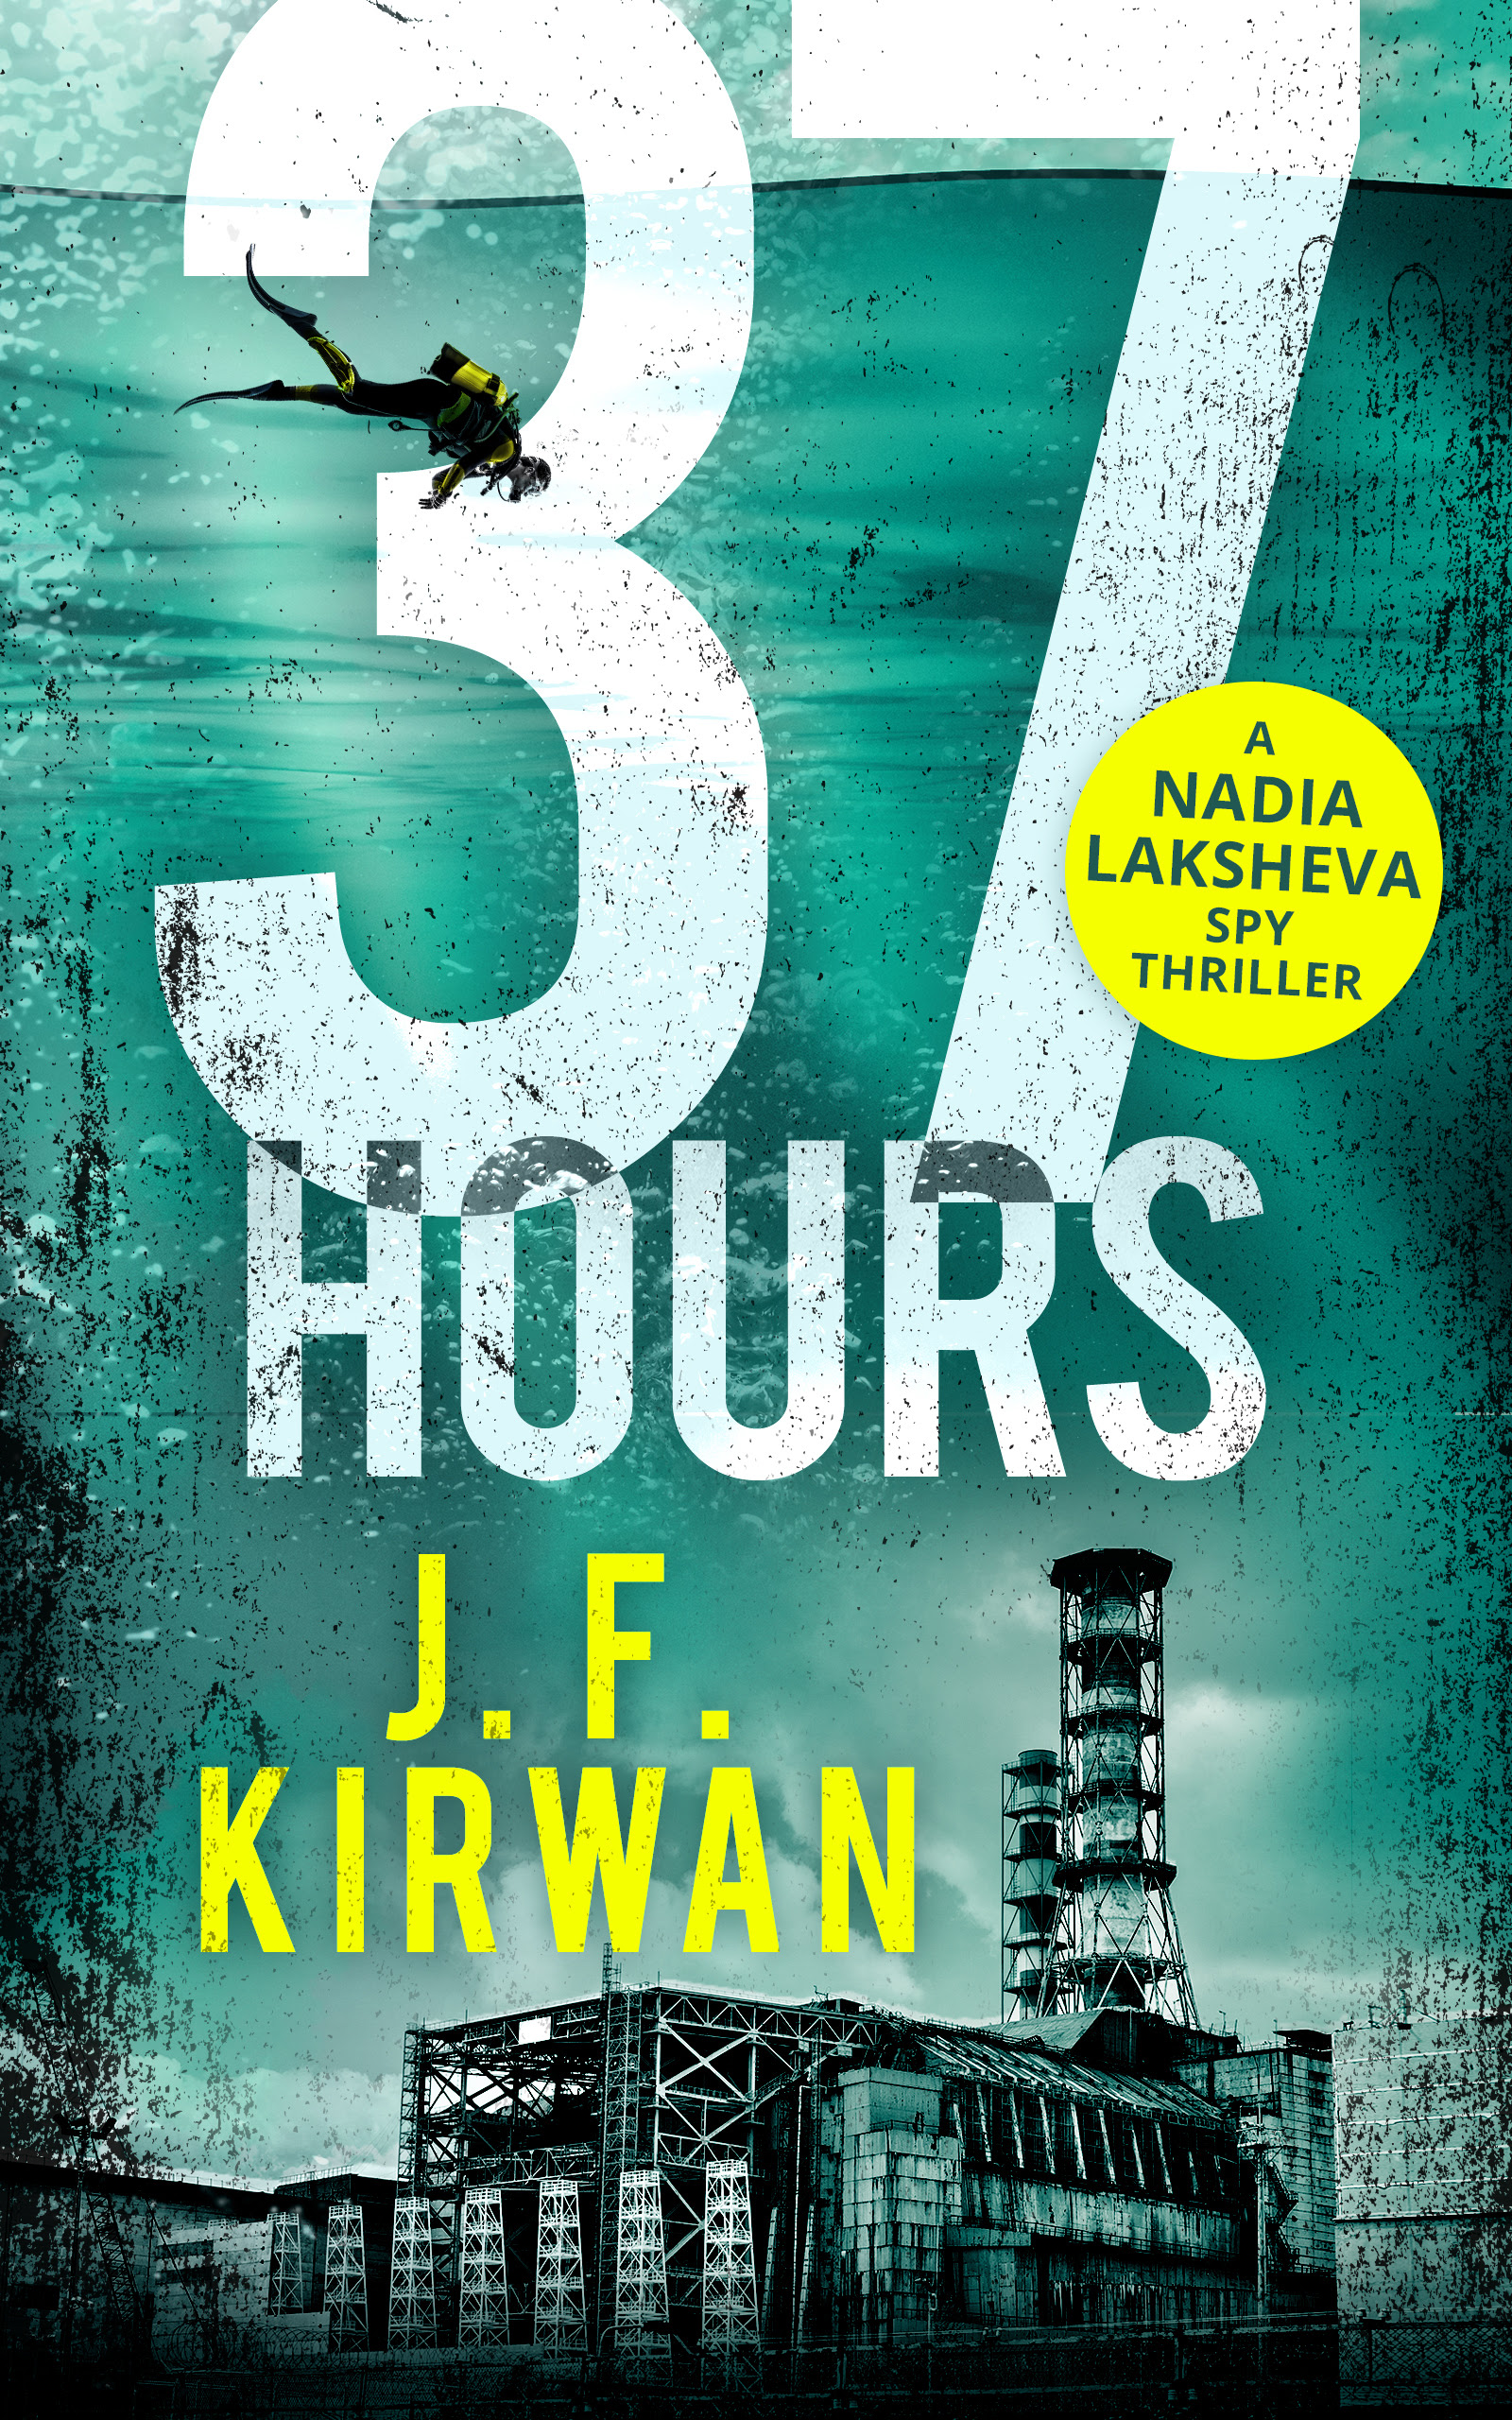 https://wall-to-wall-books.blogspot.com/2017/10/37-hours-by-jf-kirwan-giveaway.html